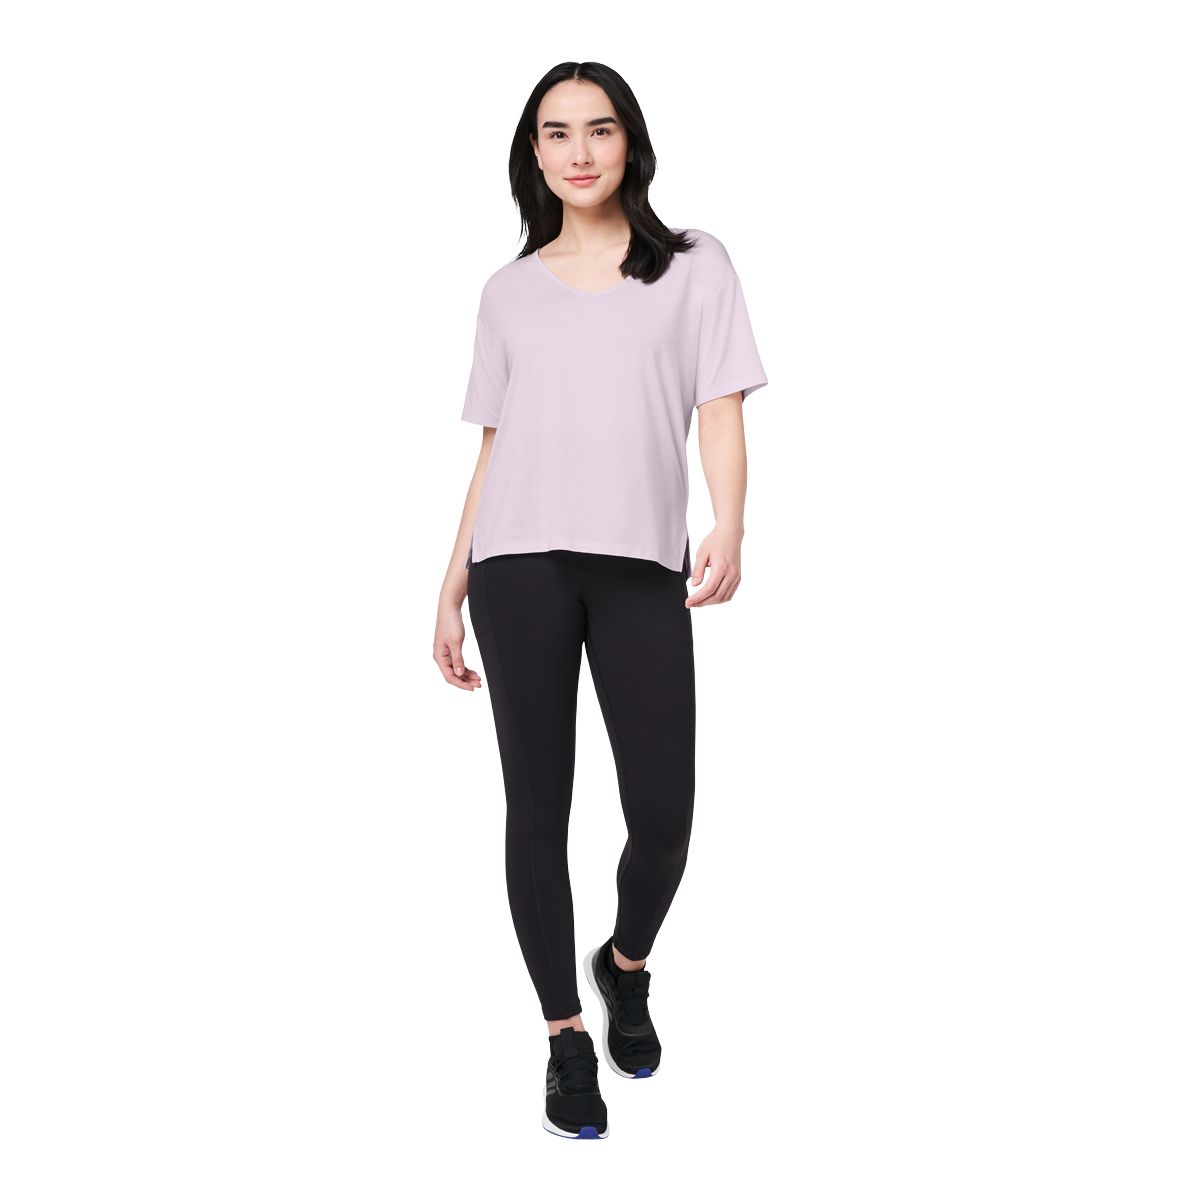 Chances R Women's Leggings On Sale Up To 90% Off Retail